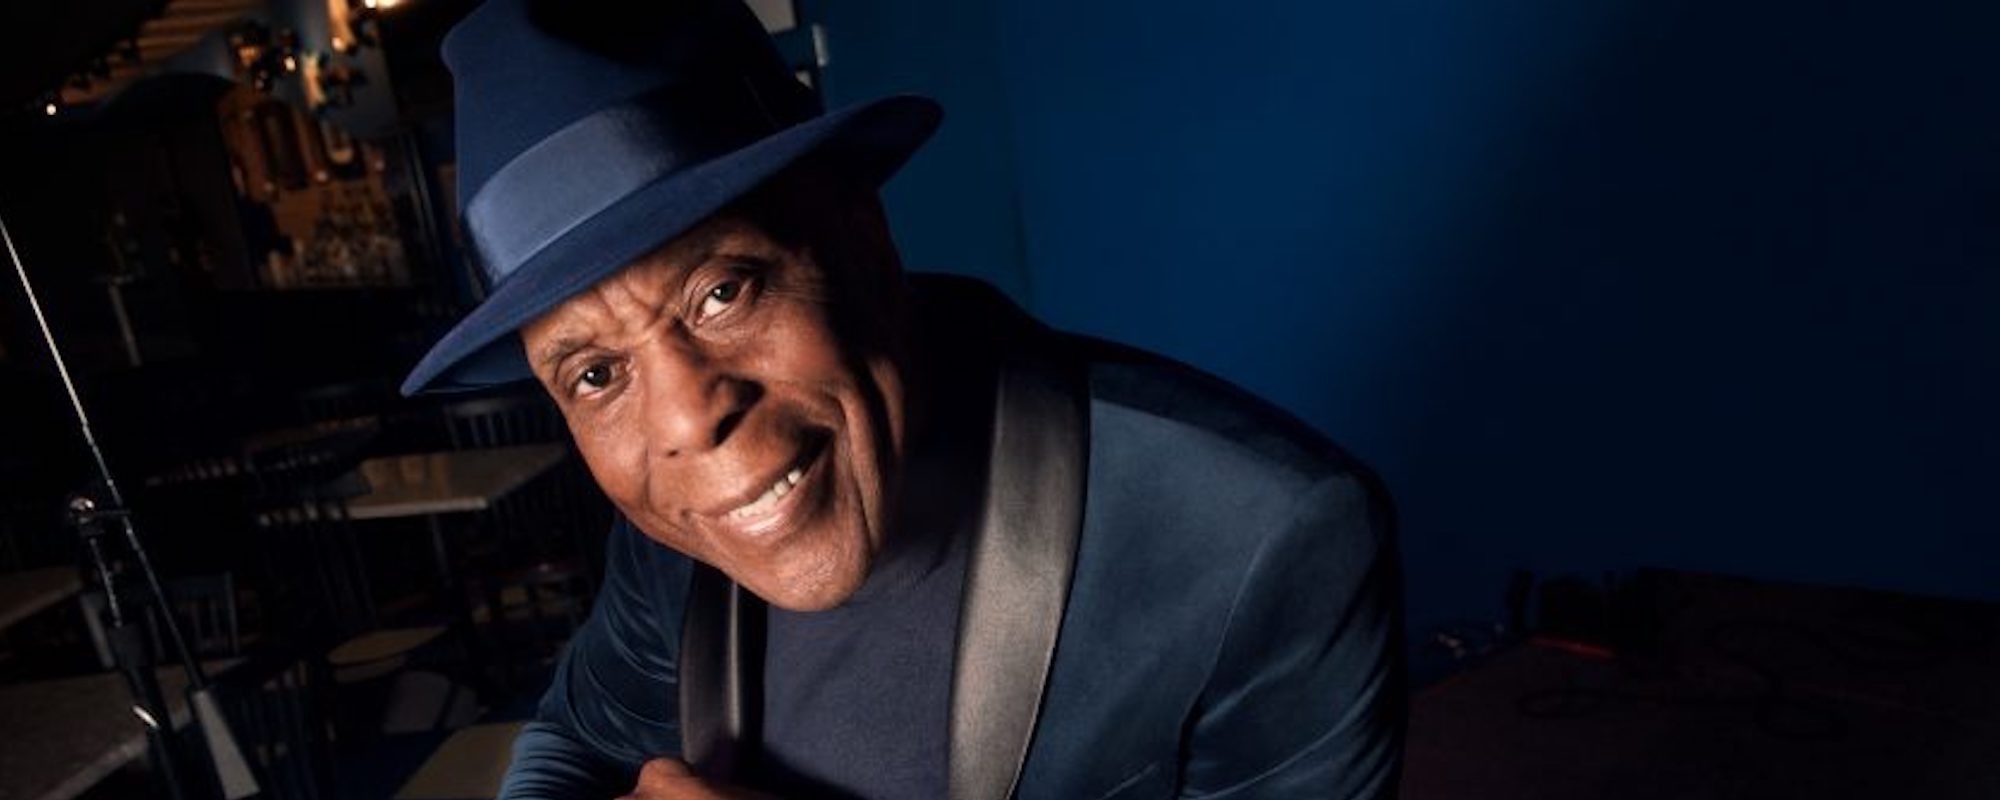 Buddy Guy Lives for the Blues—“If I Can Make You Smile, I Can Sleep Better”